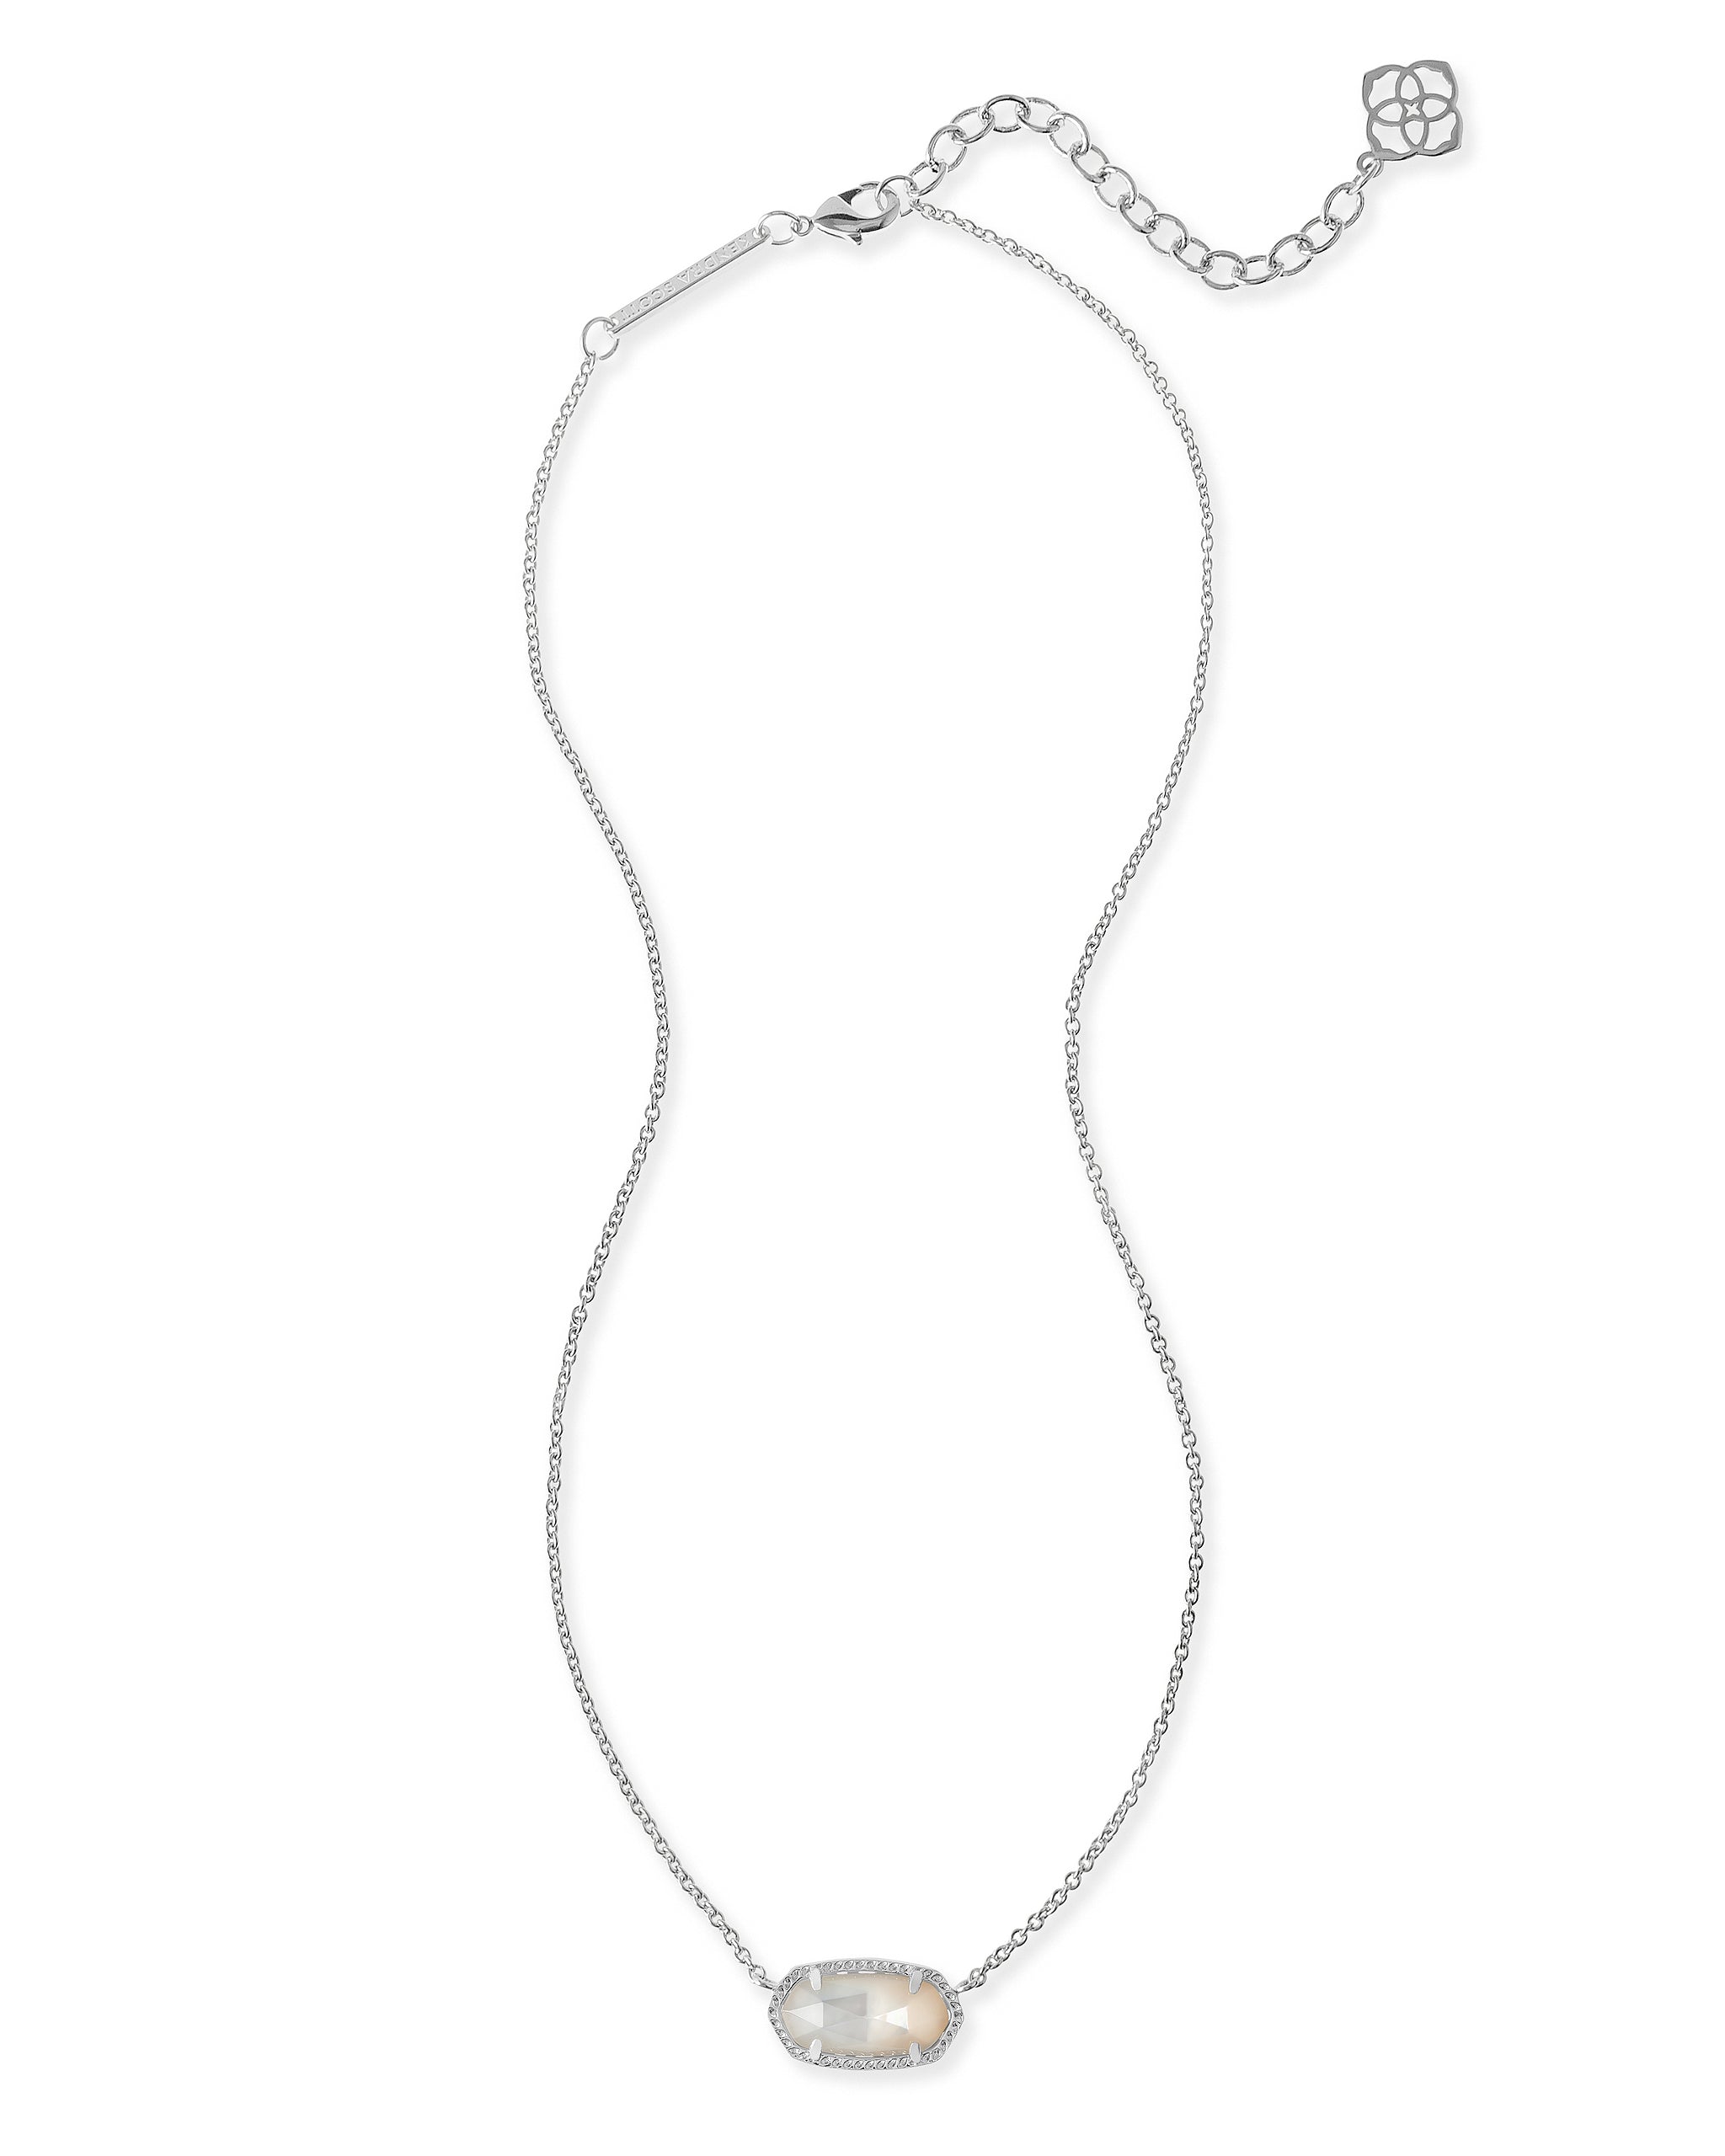 Kendra Scott Elisa Oval Pendant Necklace in Ivory Pearl and Rhodium